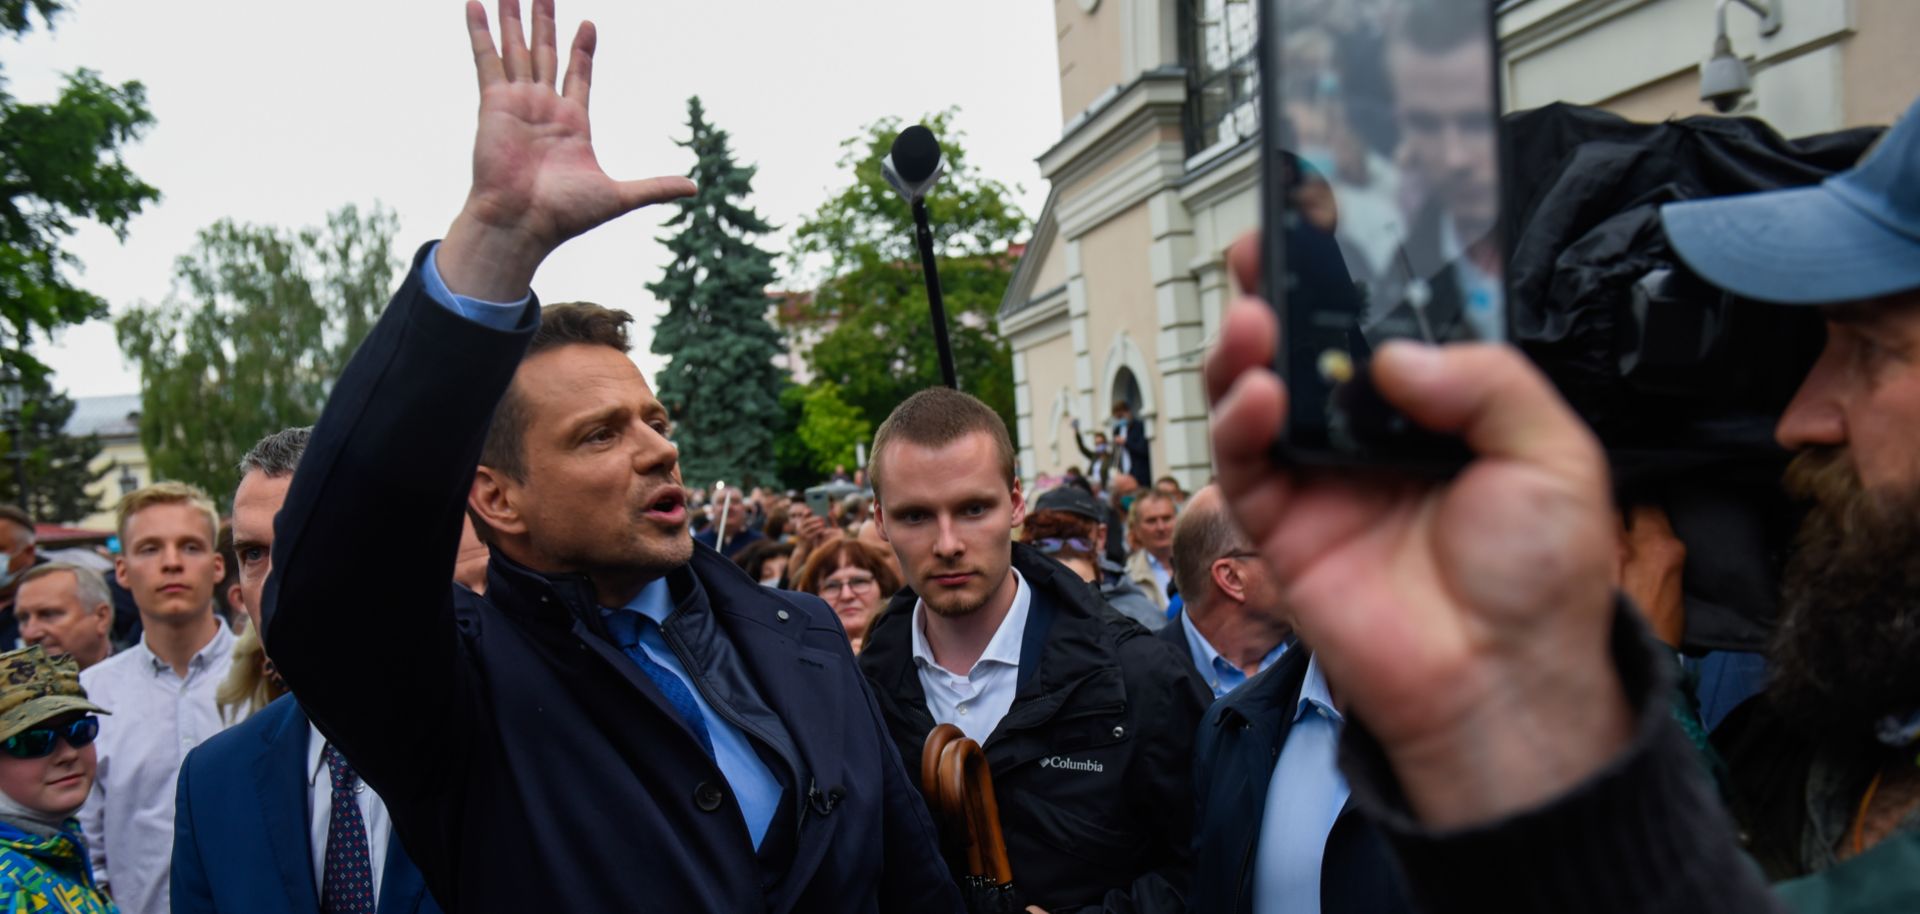 Warsaw Mayor Rafal Trzaskowski, one of the main opposition candidates running in Poland's 2020 presidential election, greets locals and supporters in Wieliczka, Poland, during a campaign event on June 5, 2020. 